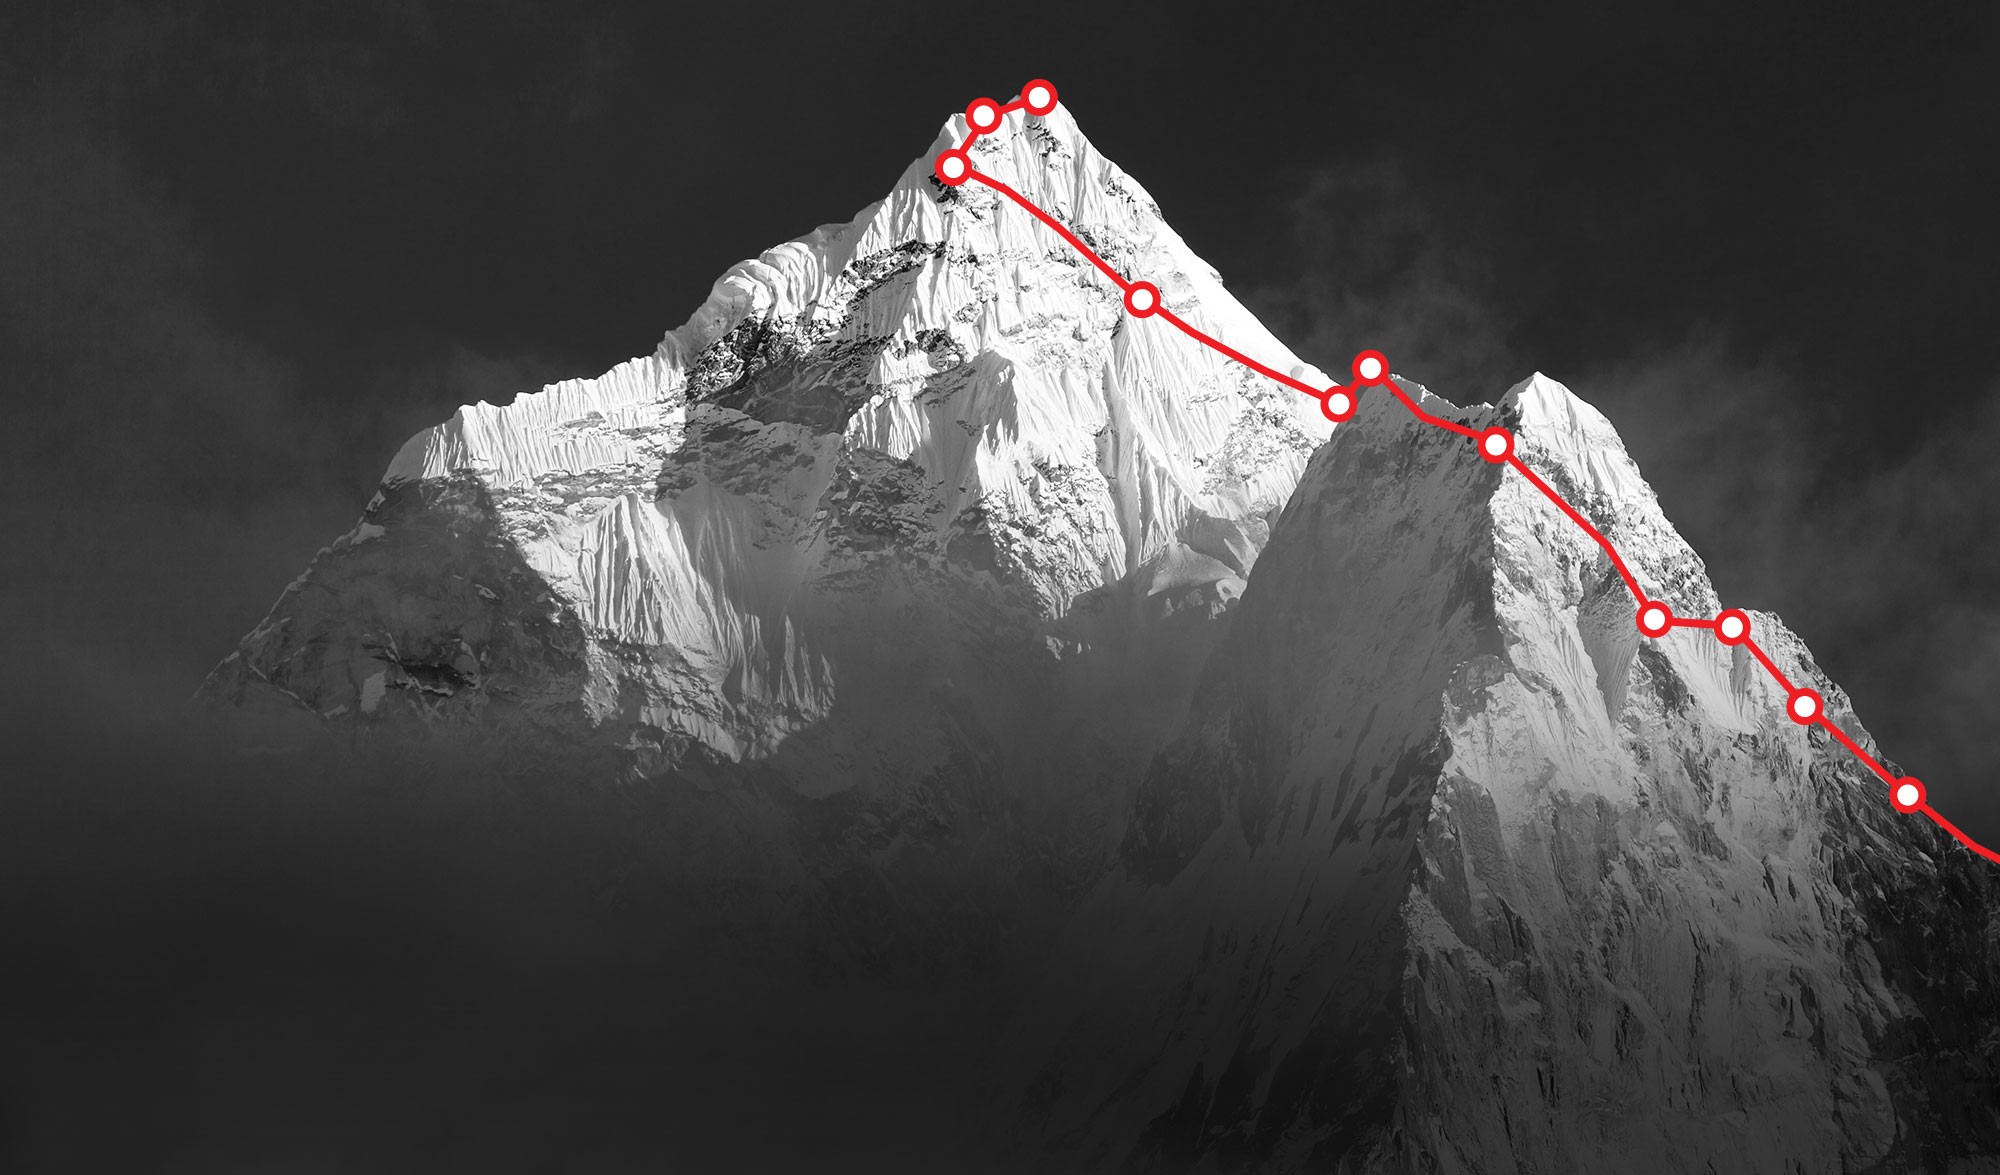 Image of mountain with a path marked using lines and circles across the ridge